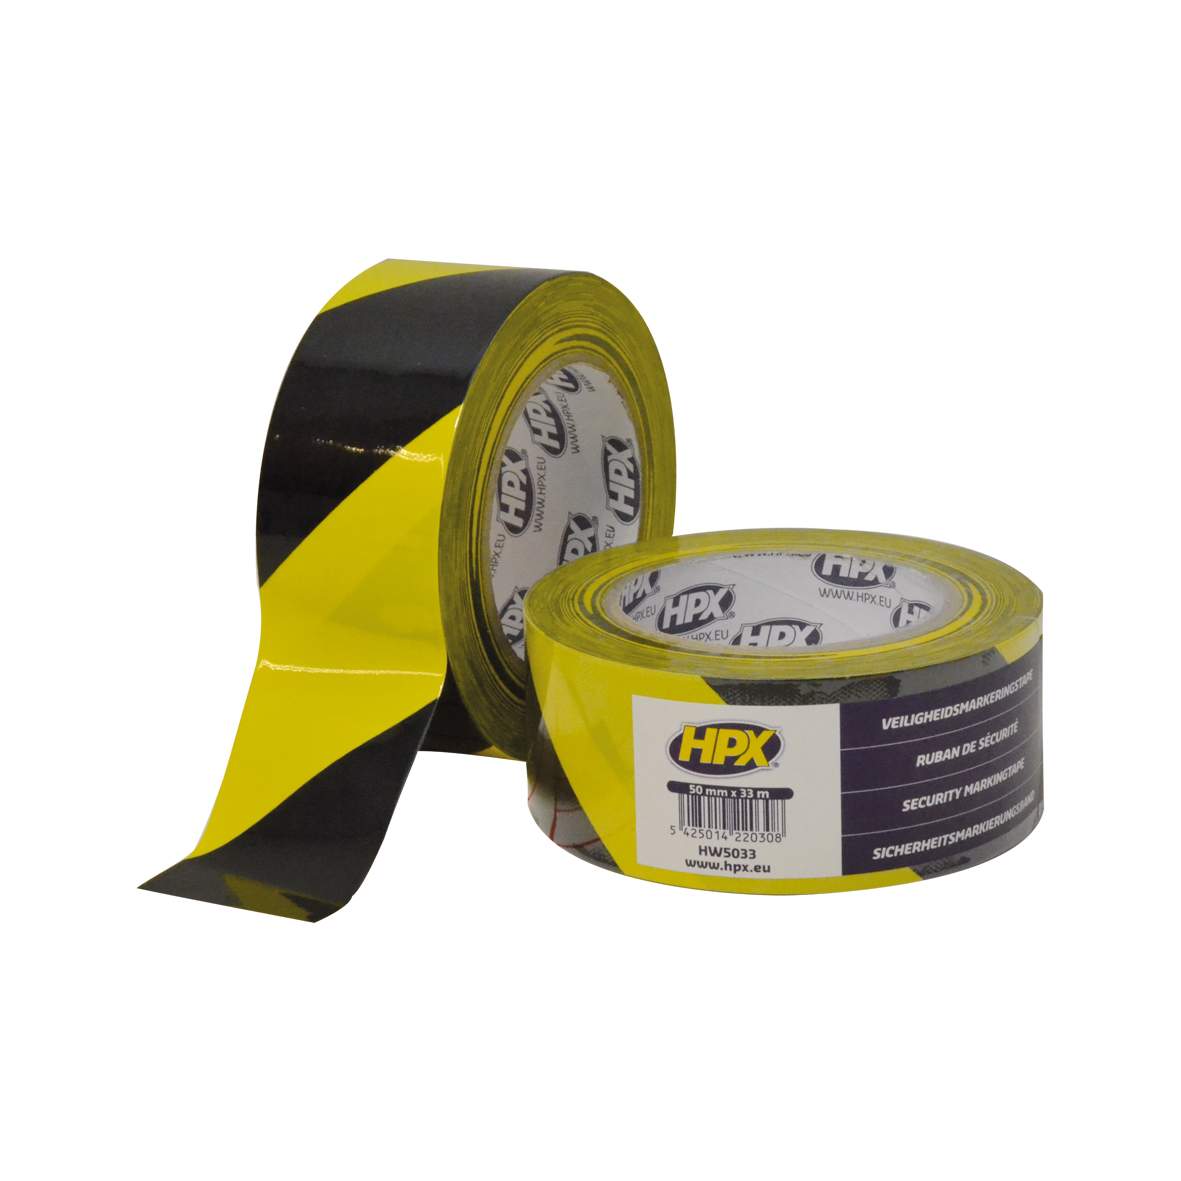 Signalling and safety tape, yellow and black adhesive, 50mm x 33m